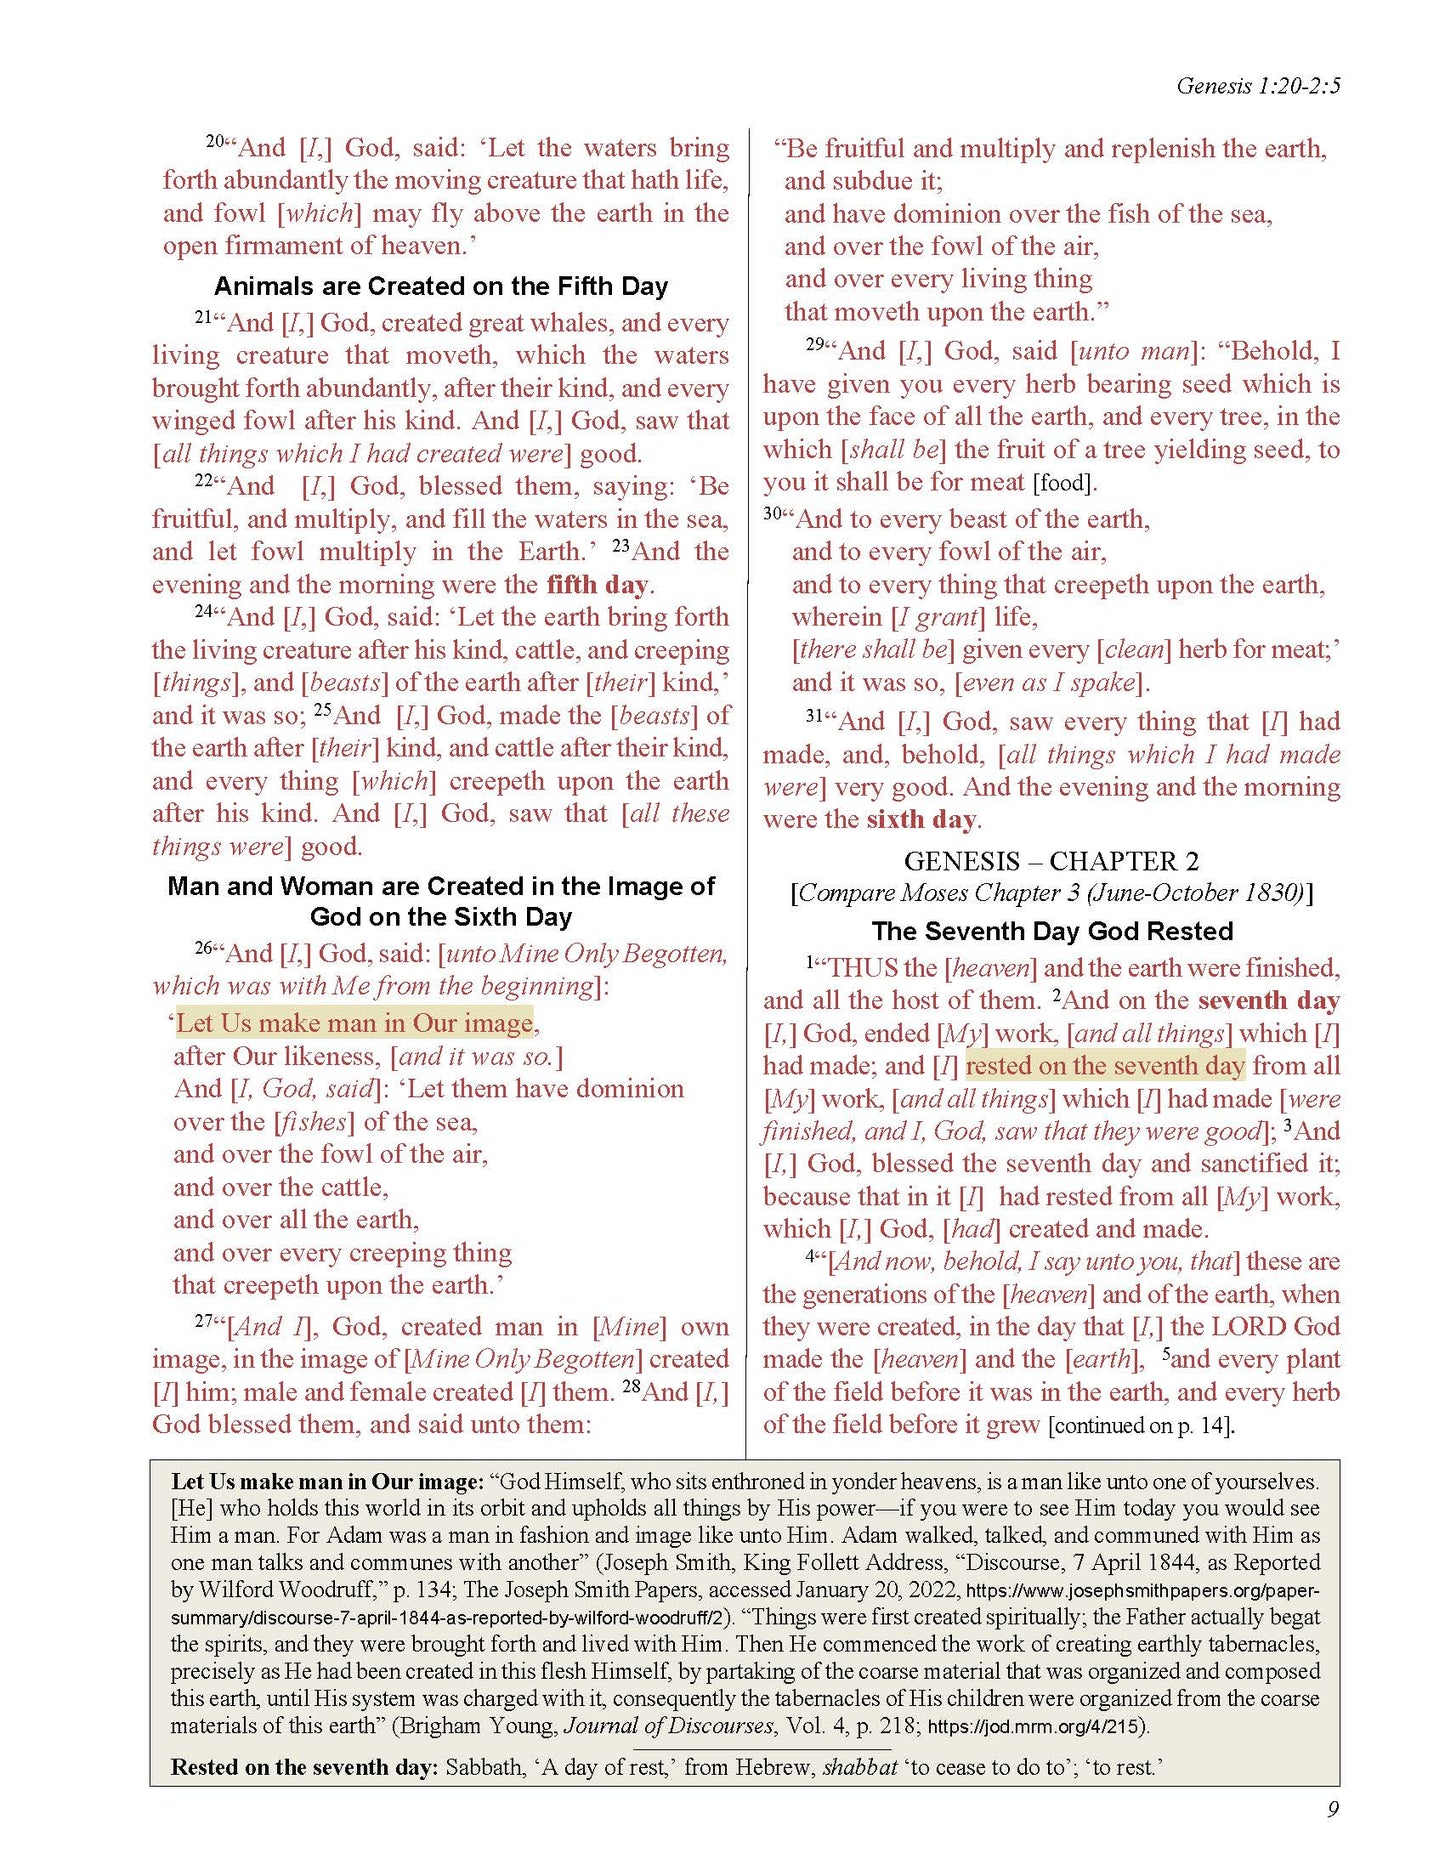 Annotated Five Books of Moses